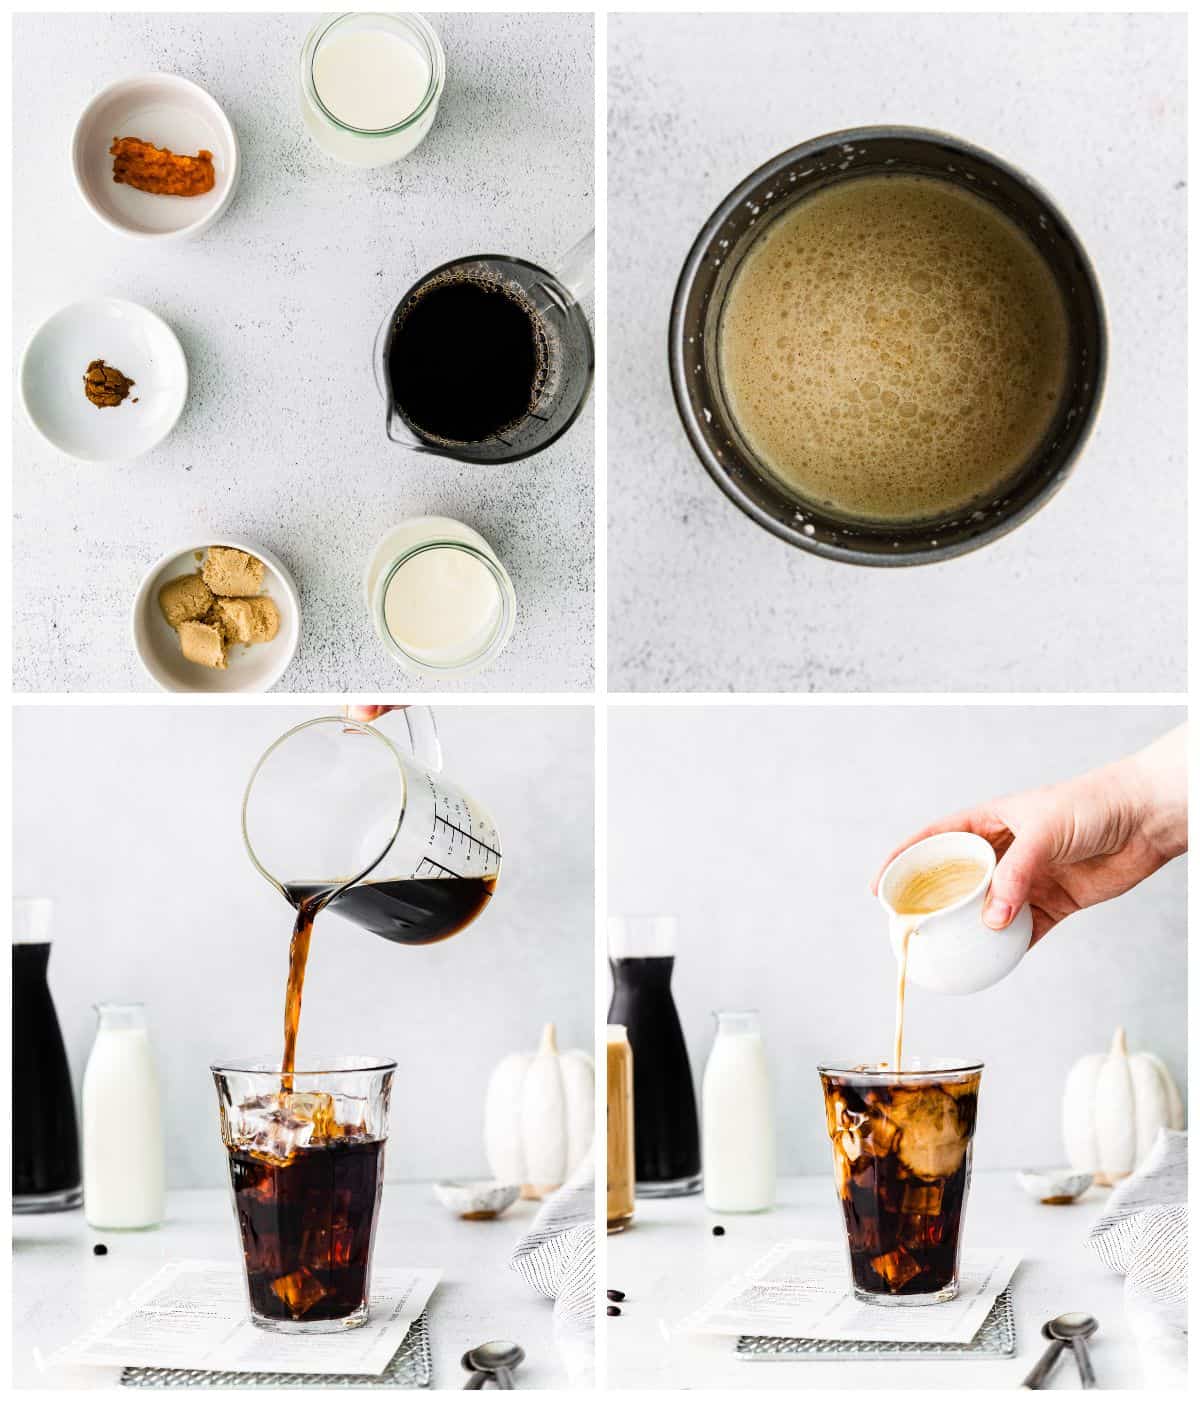 https://www.thecookierookie.com/wp-content/uploads/2021/09/step-by-step-photos-for-how-to-make-pumpkin-cream-cold-brew.jpg